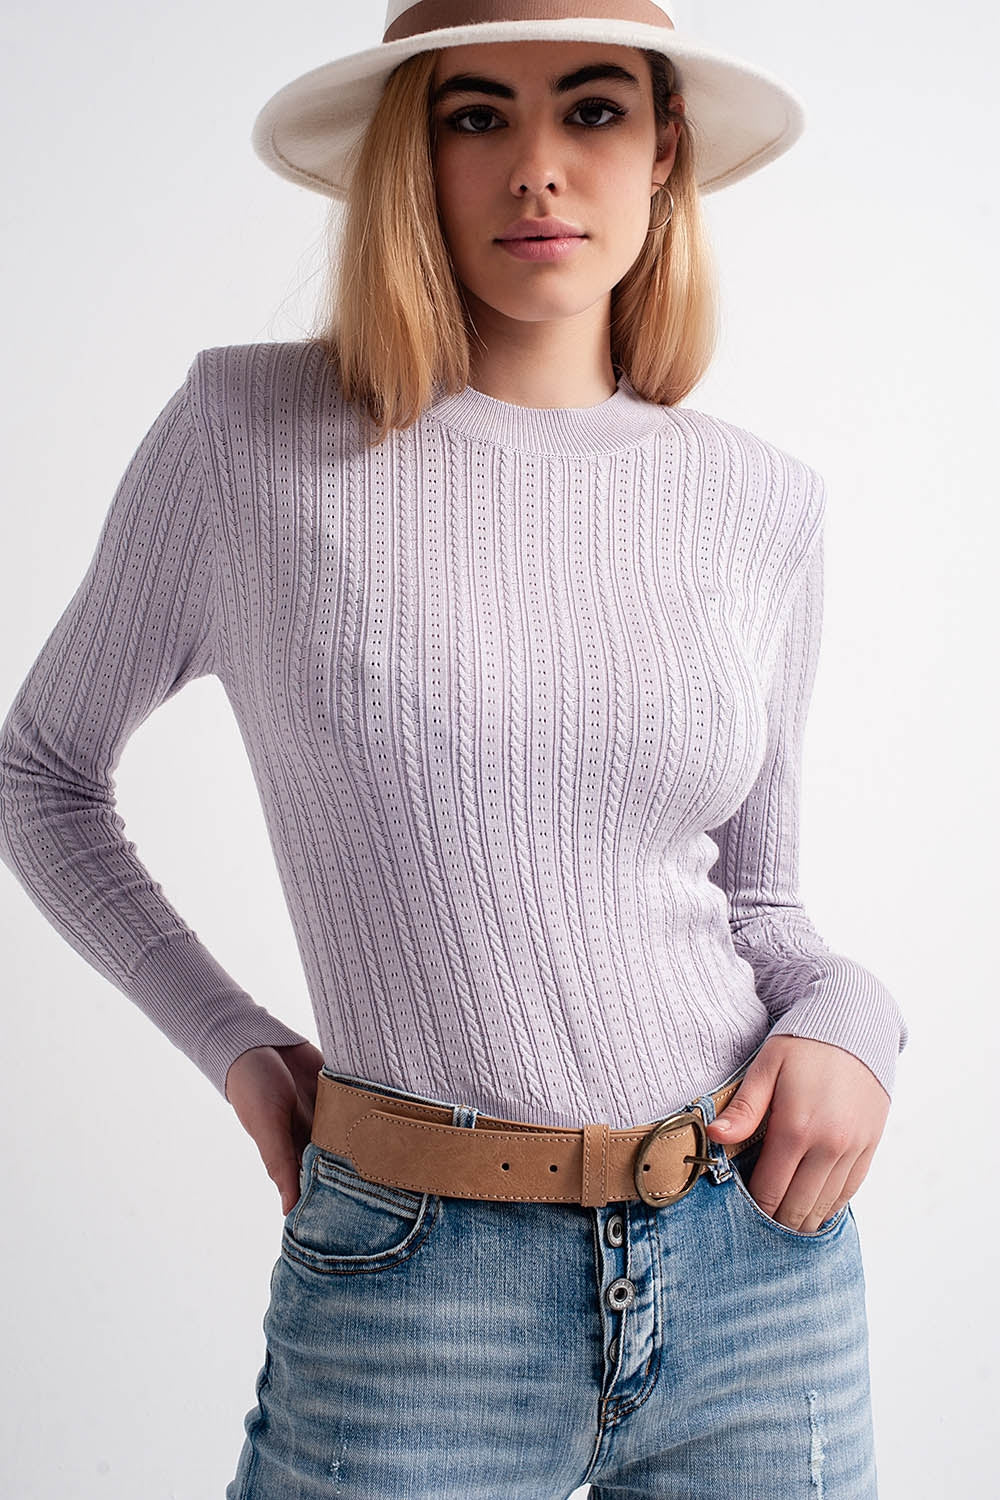 Jumper with shoulder pad in lilac